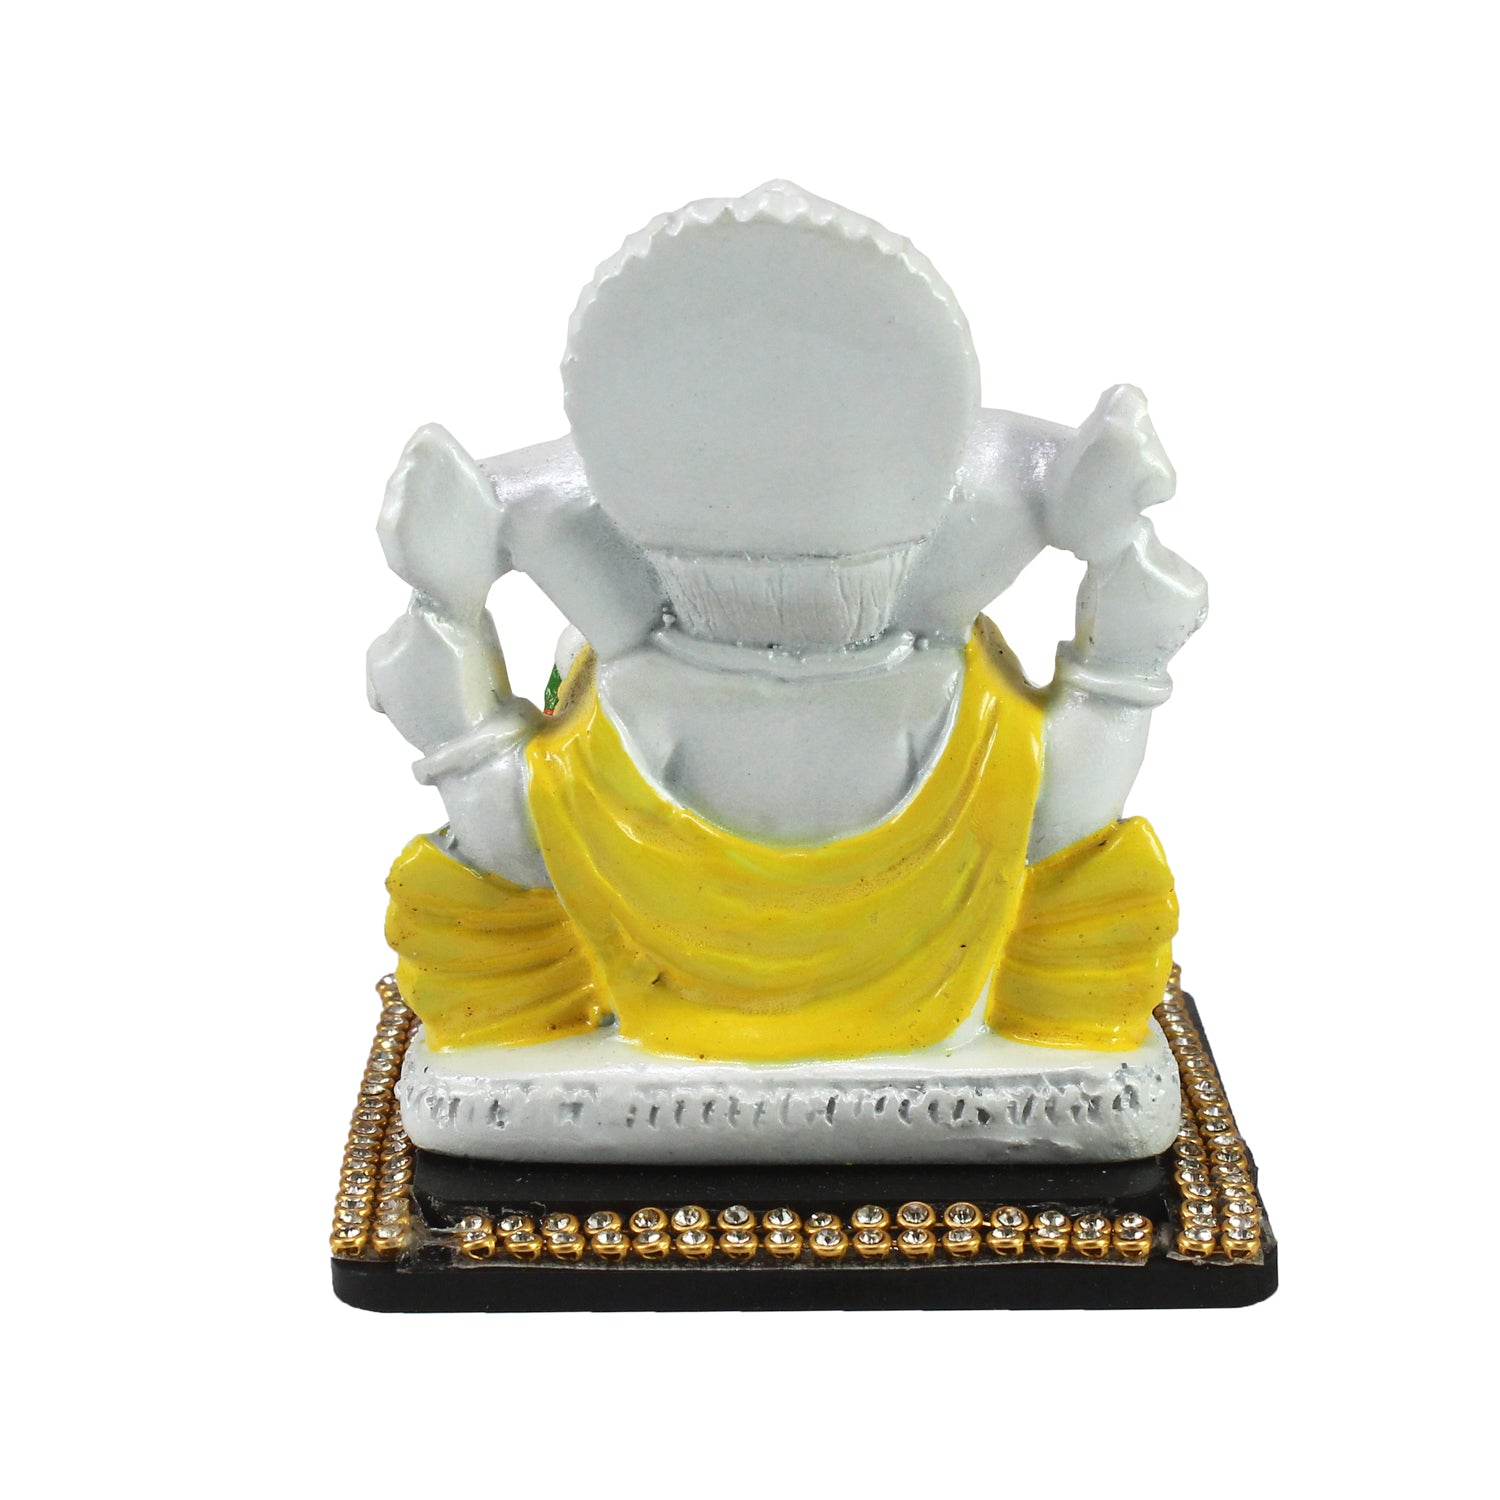 Decorative Lord Ganesha Showpiece for Car Dashboard, Home Temple and Office Desks 5